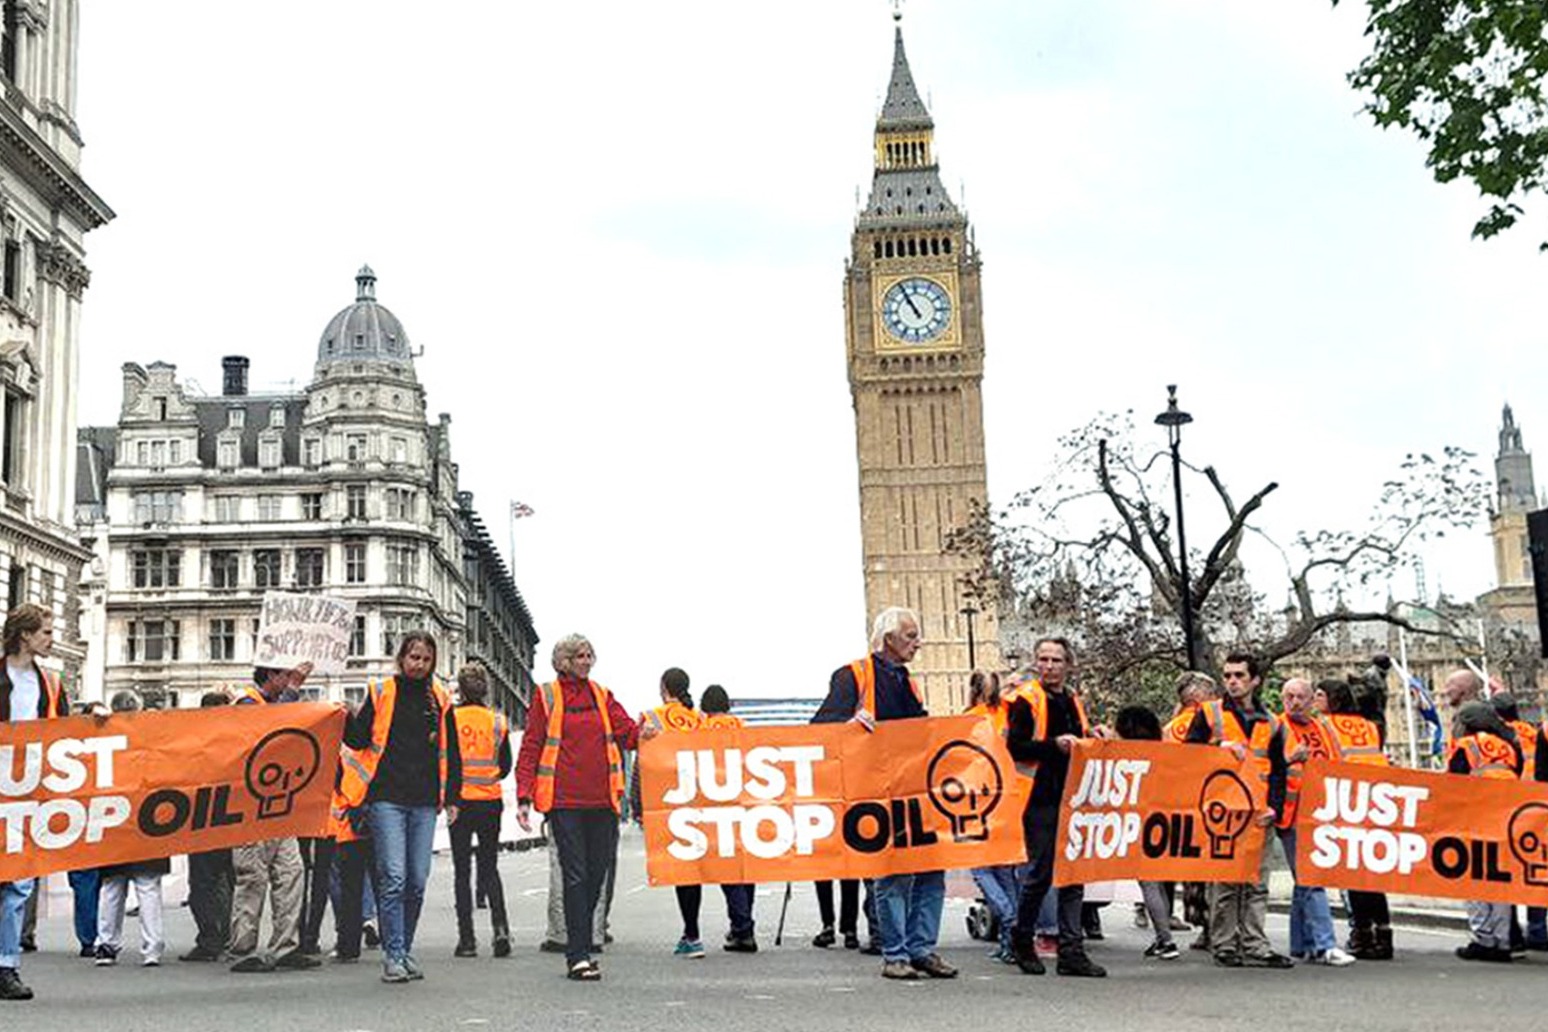 Just Stop Oil protesters arrested in Parliament Square 